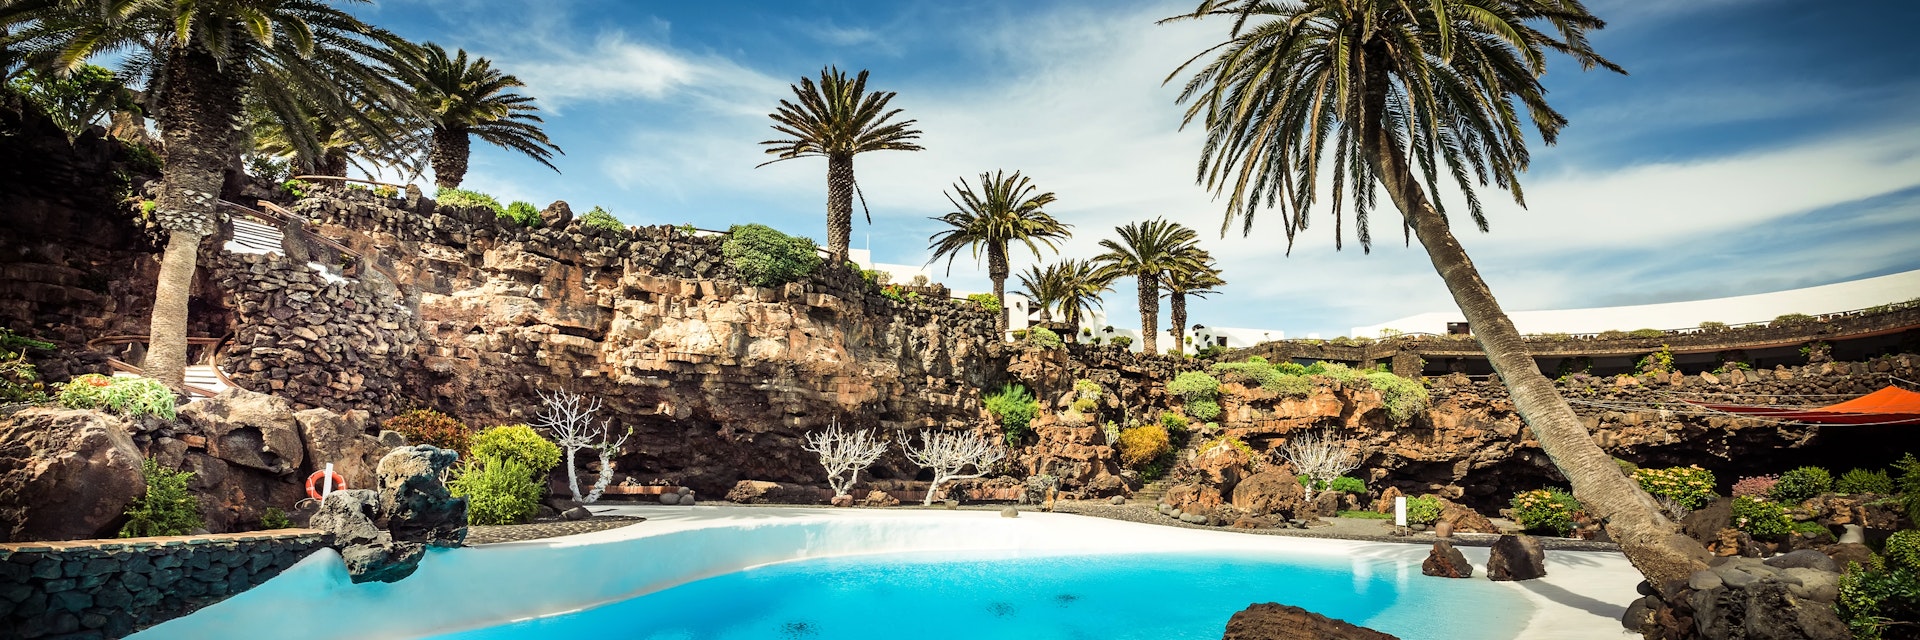 outer Jameos del Agua pool, Lanzarote, Canary Islands, Spain; Shutterstock ID 283647977; Your name (First / Last): Tom Stainer; GL account no.: 65050 ; Netsuite department name: Online Editorial; Full Product or Project name including edition: Best in Travel 2018